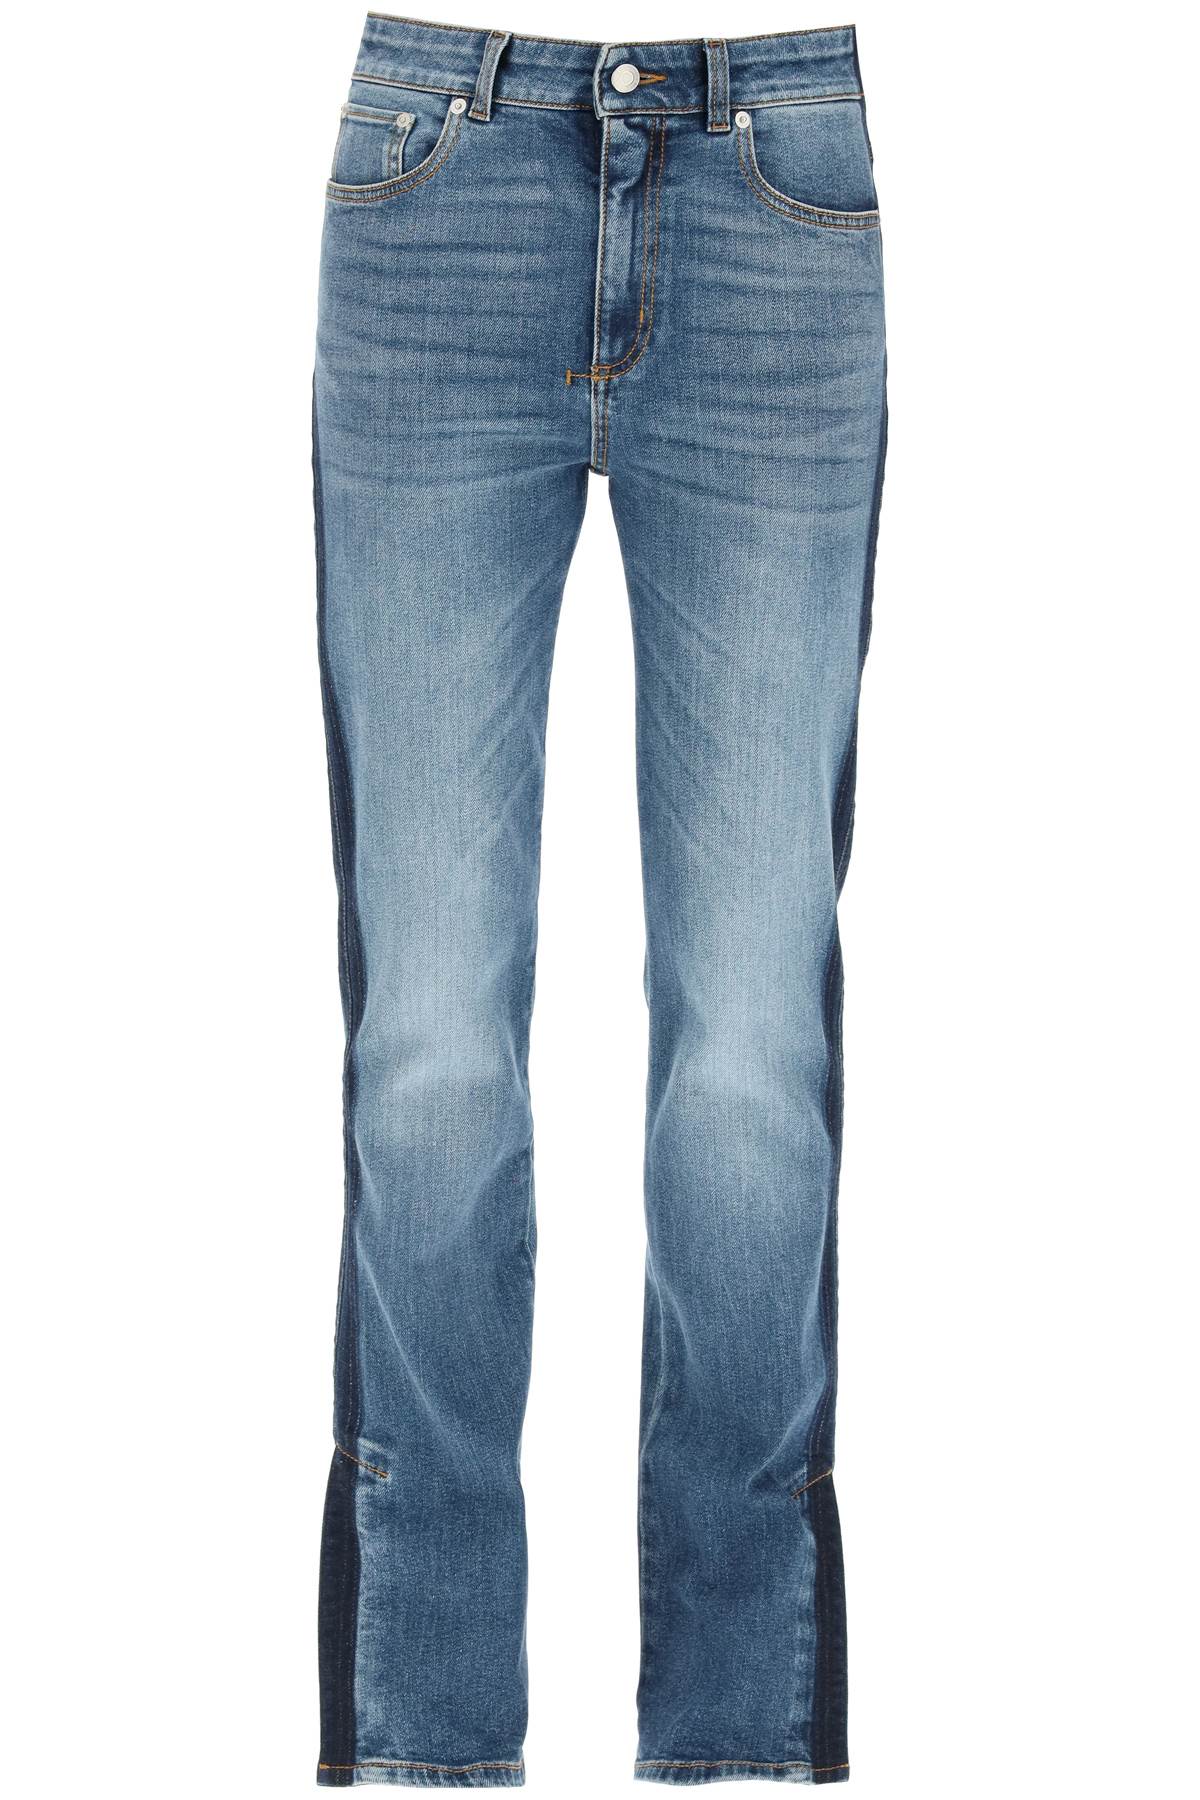 Alexander McQueen Jeans With Side Bands